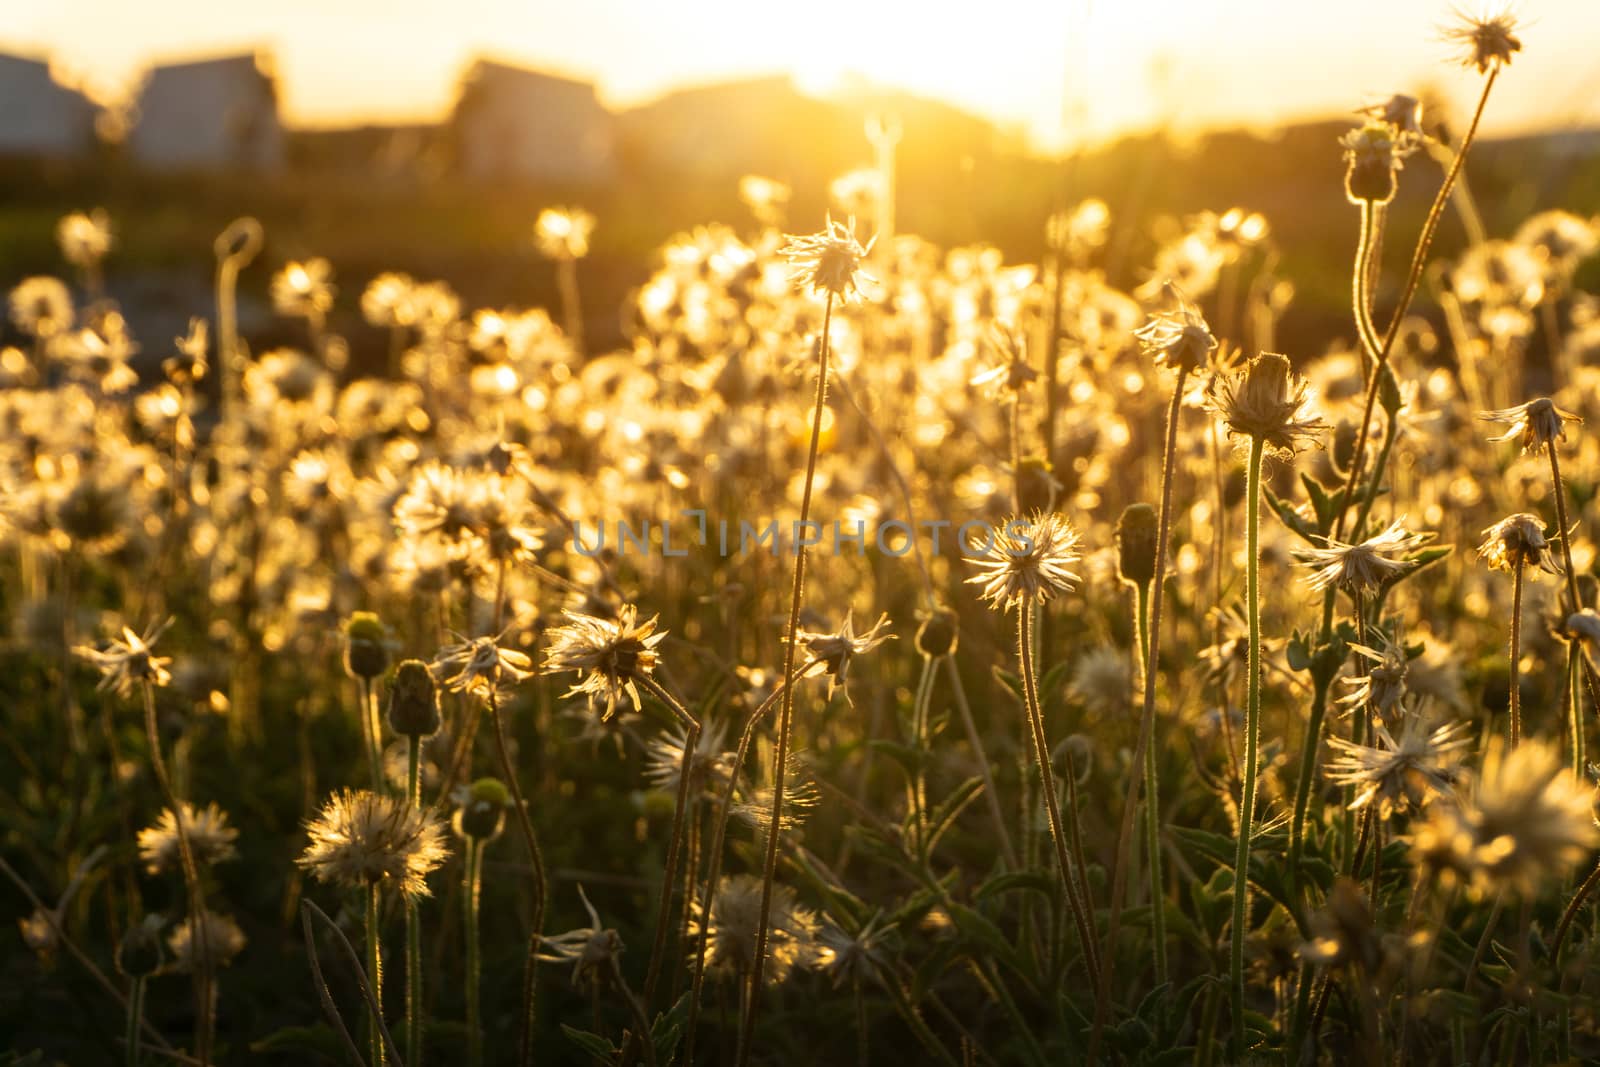 Asia Wild Grass flowers in sunset time.